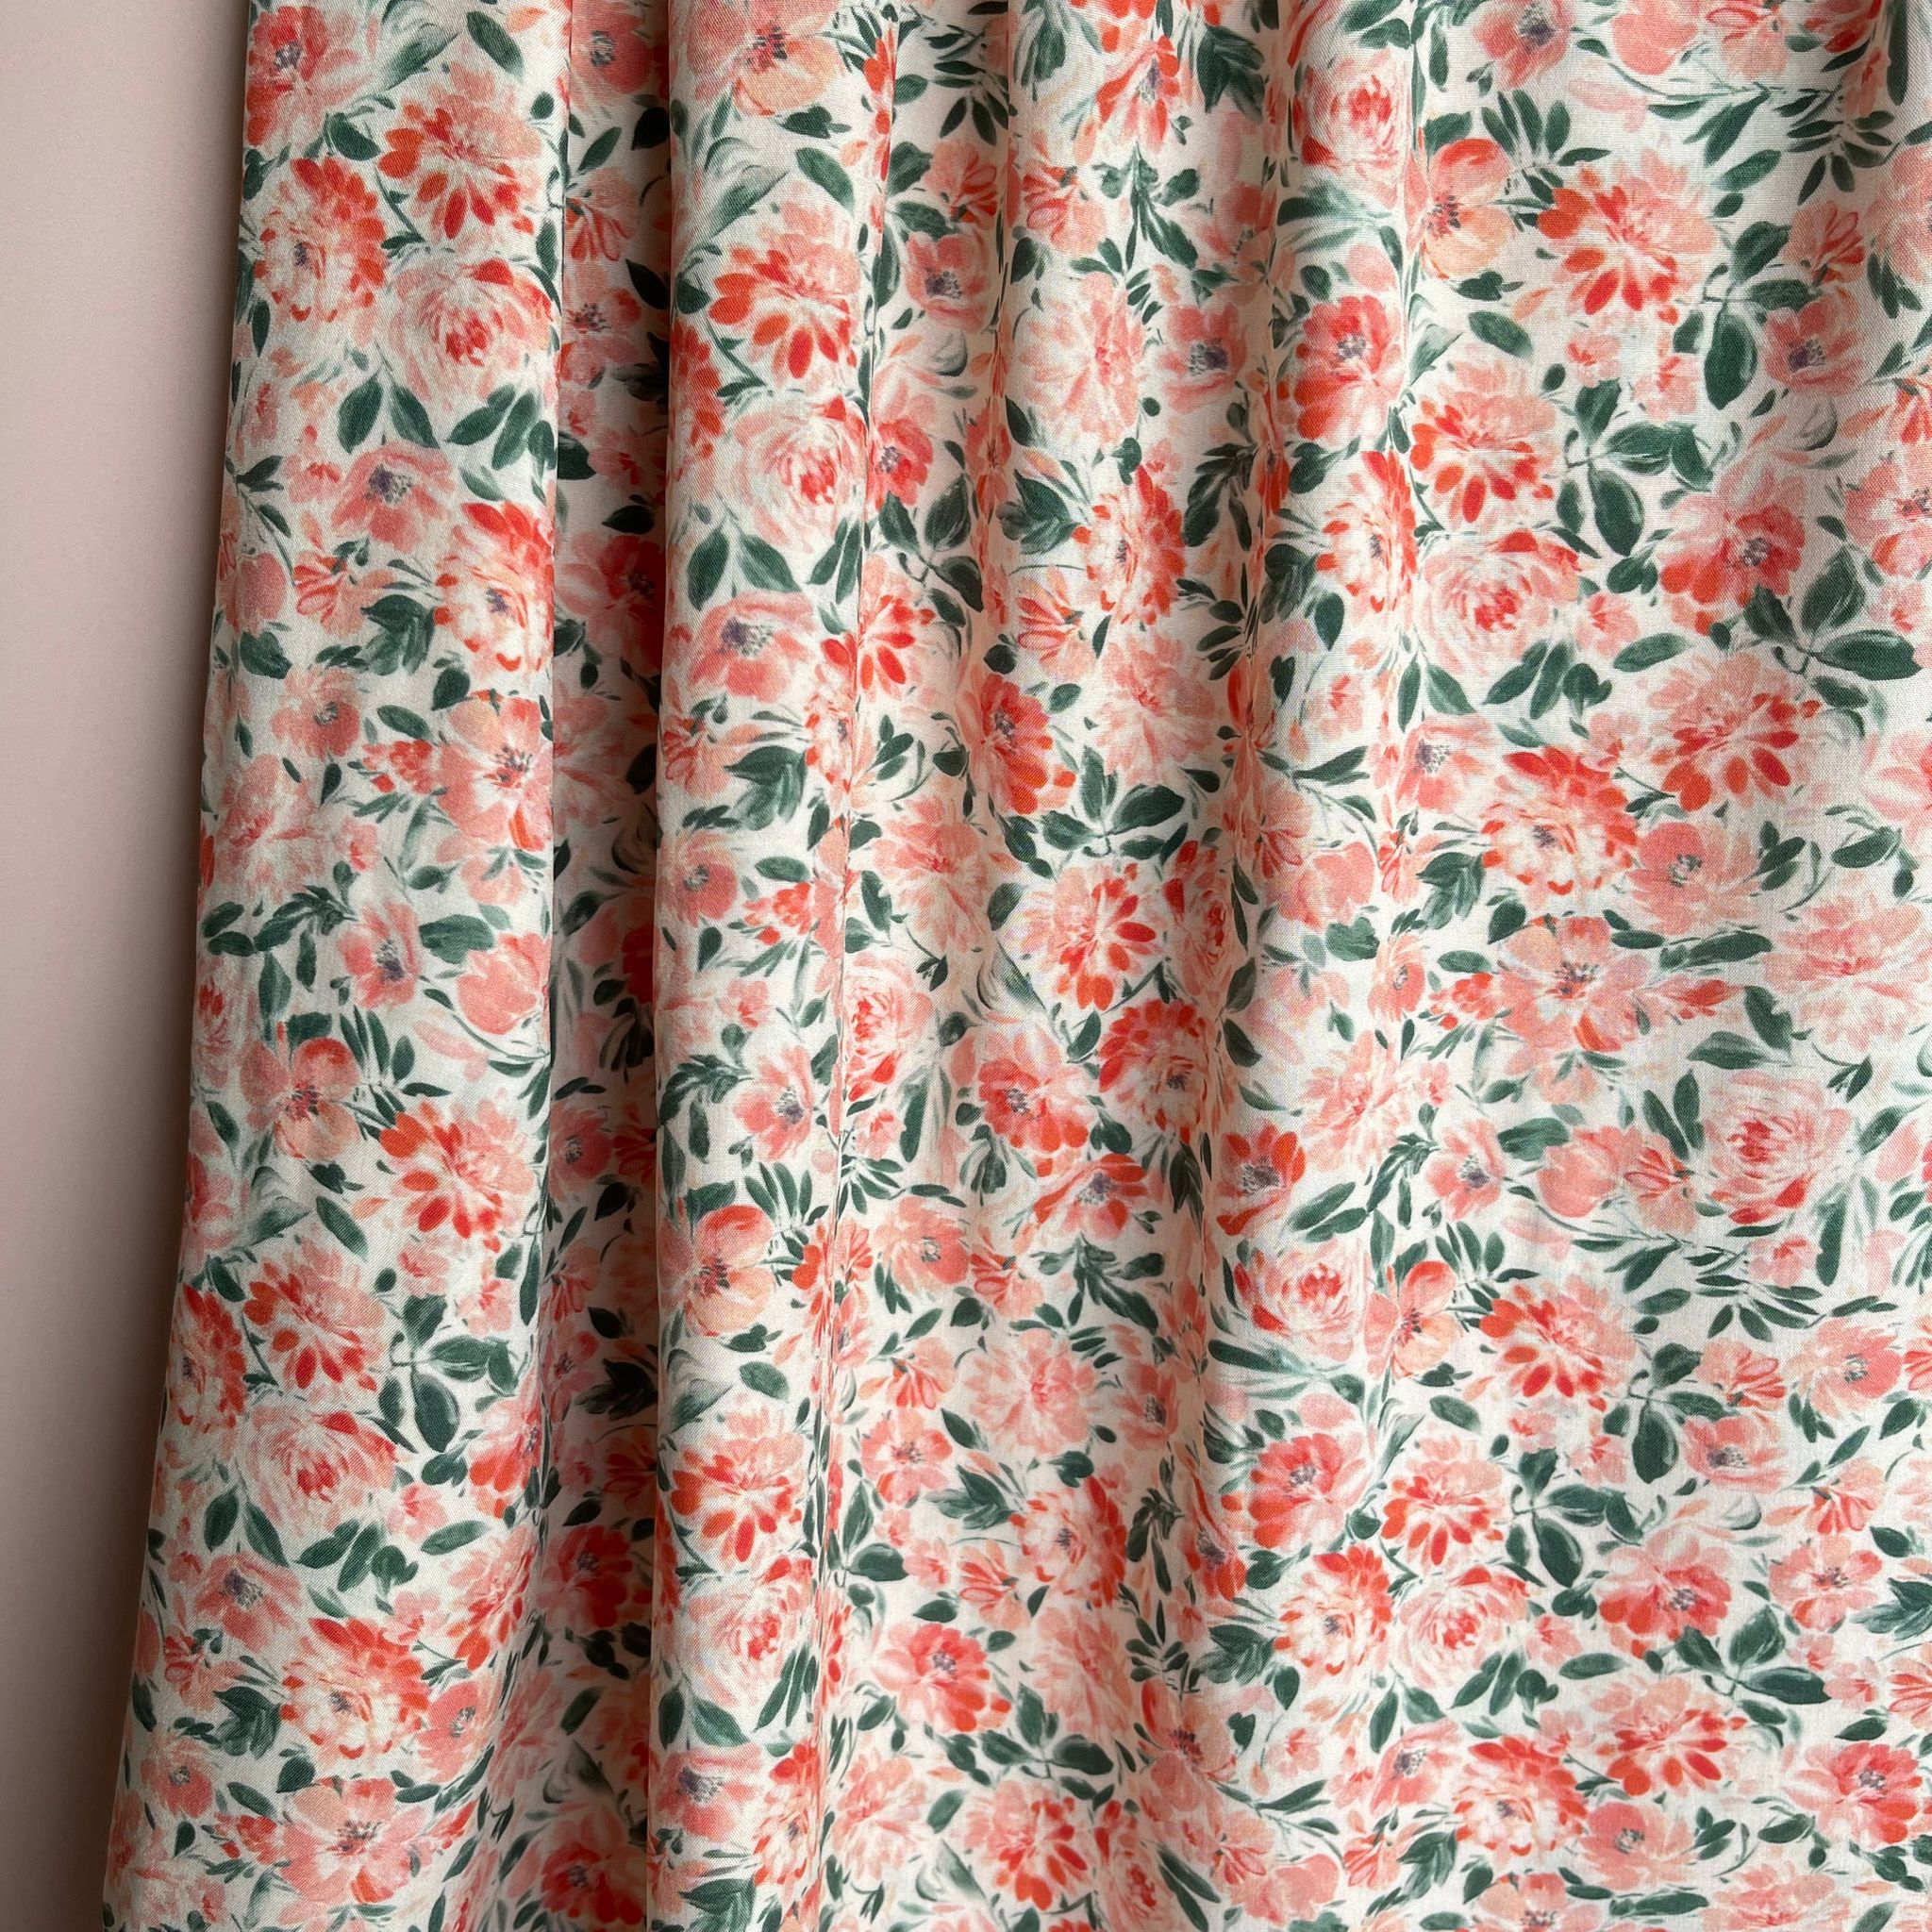 REMNANT 2.79 Metres - Peach Blooms Viscose Fabric